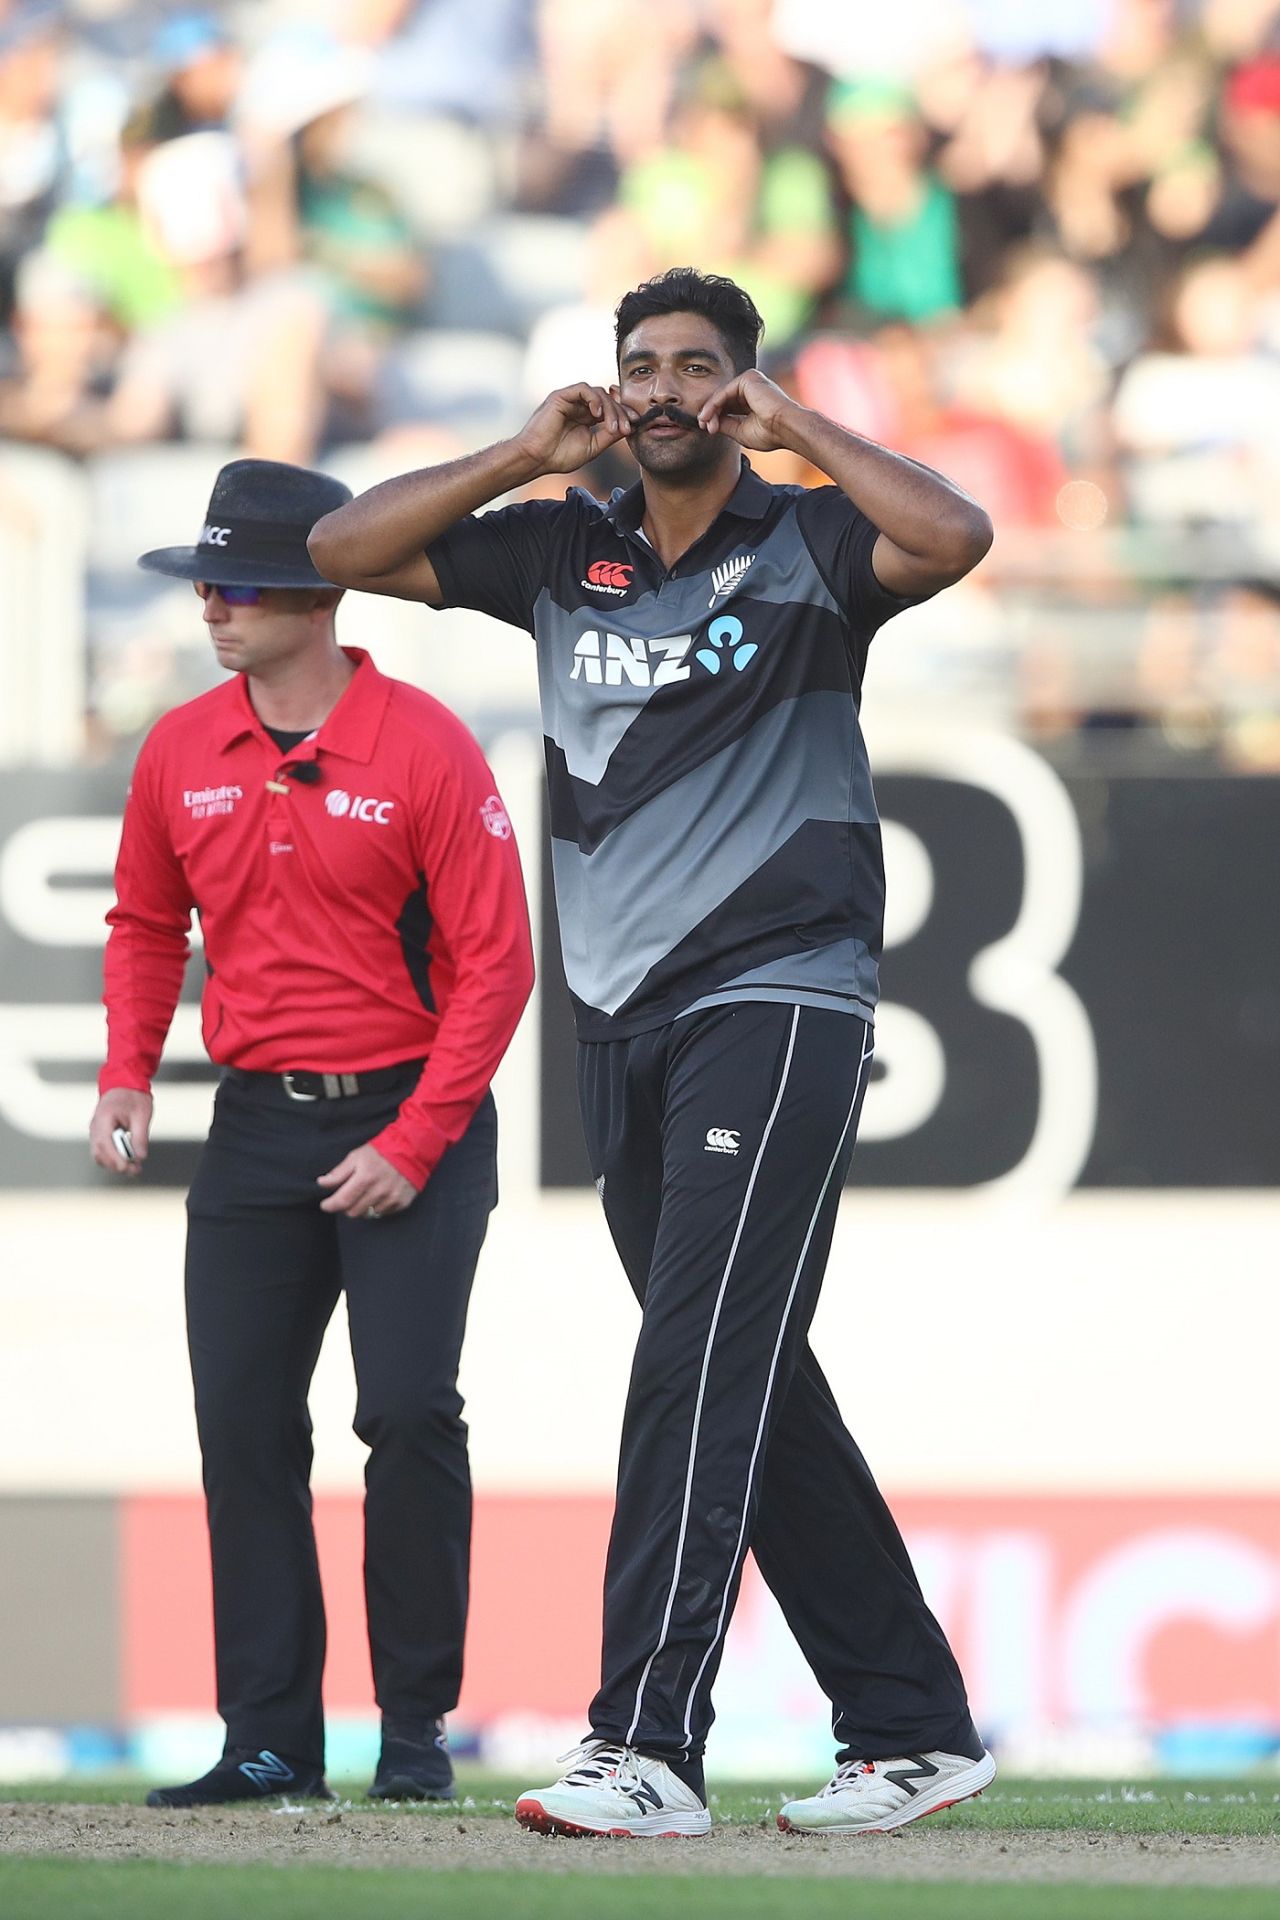 Ish Sodhi gives his moustache a twirl after getting Khushdil Shah's wicket, New Zealand vs Pakistan, 1st T20I, Auckland, December 18, 2020